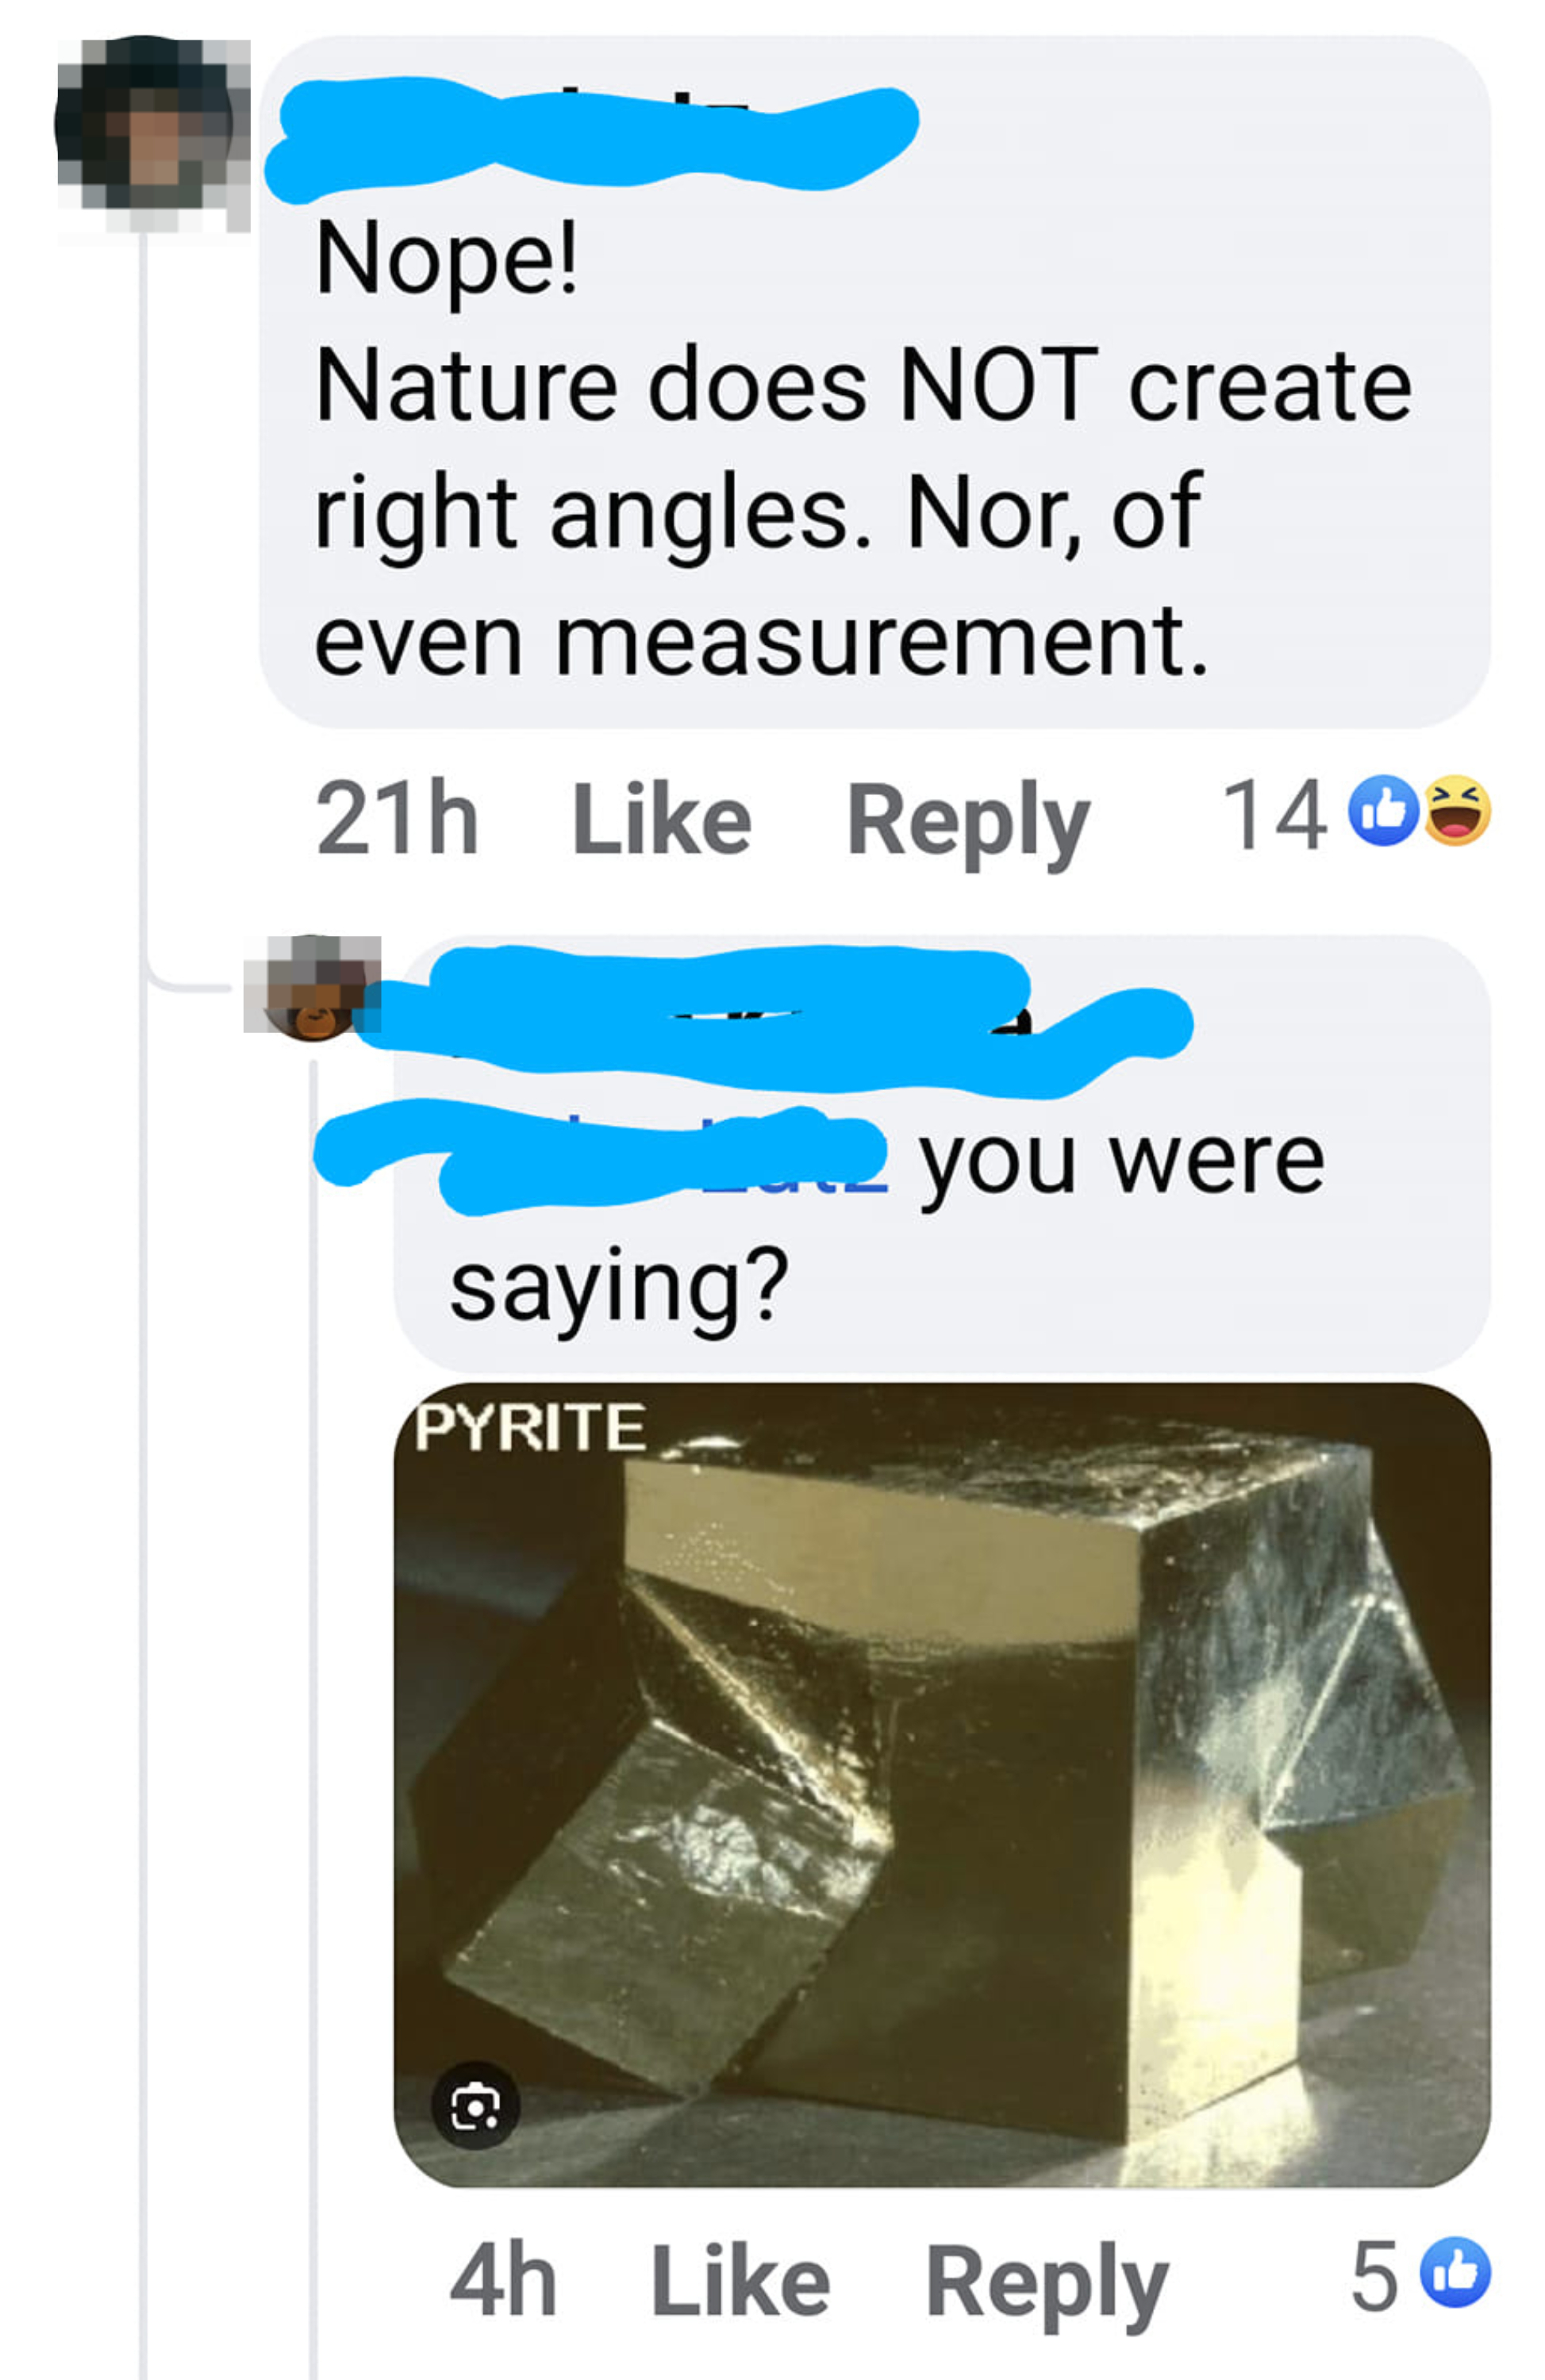 A Facebook screenshot showing a comment debate about whether nature creates right angles, with an image of a natural pyrite crystal